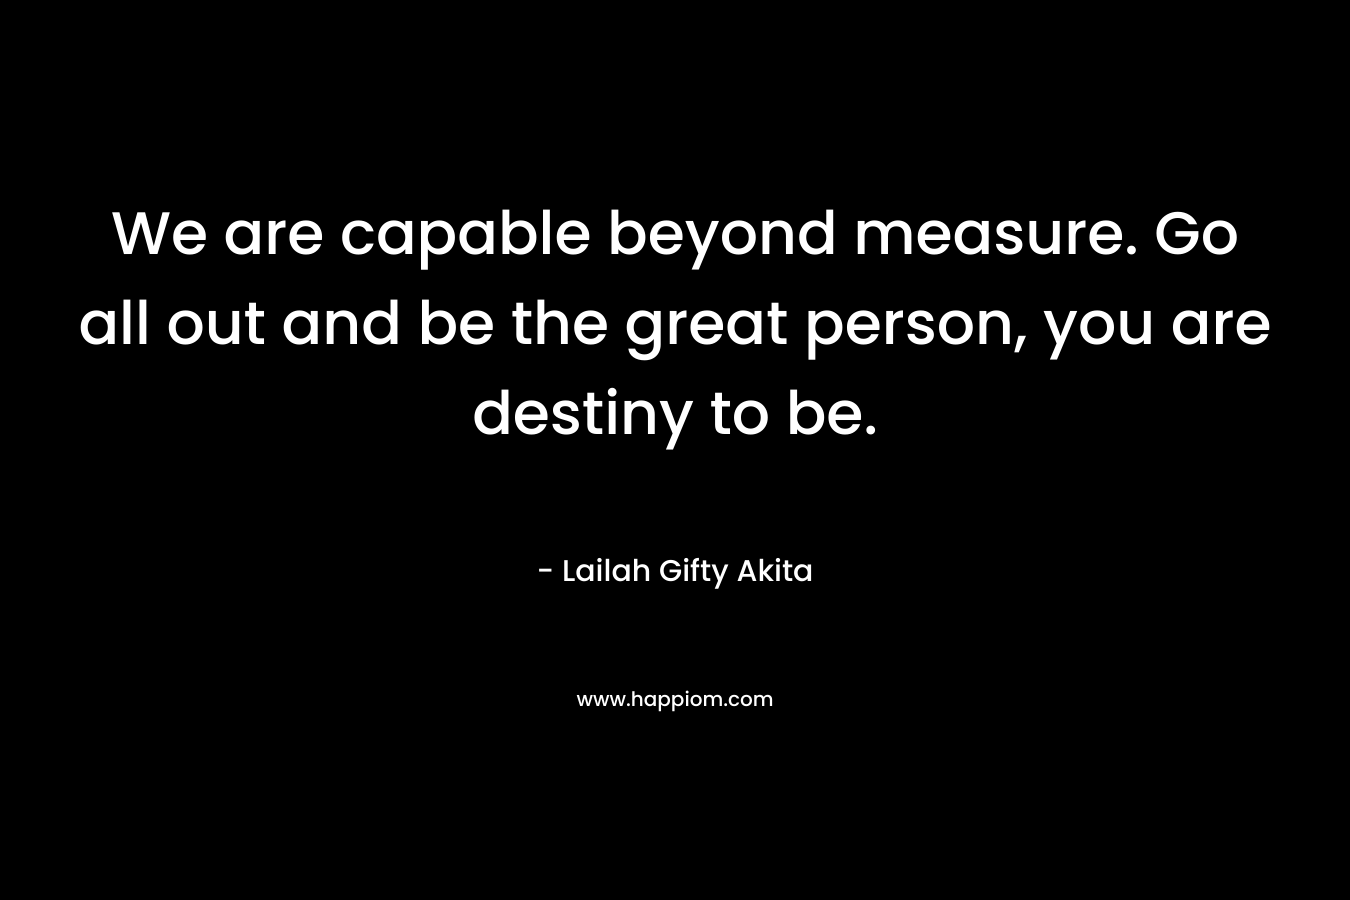 We are capable beyond measure. Go all out and be the great person, you are destiny to be.